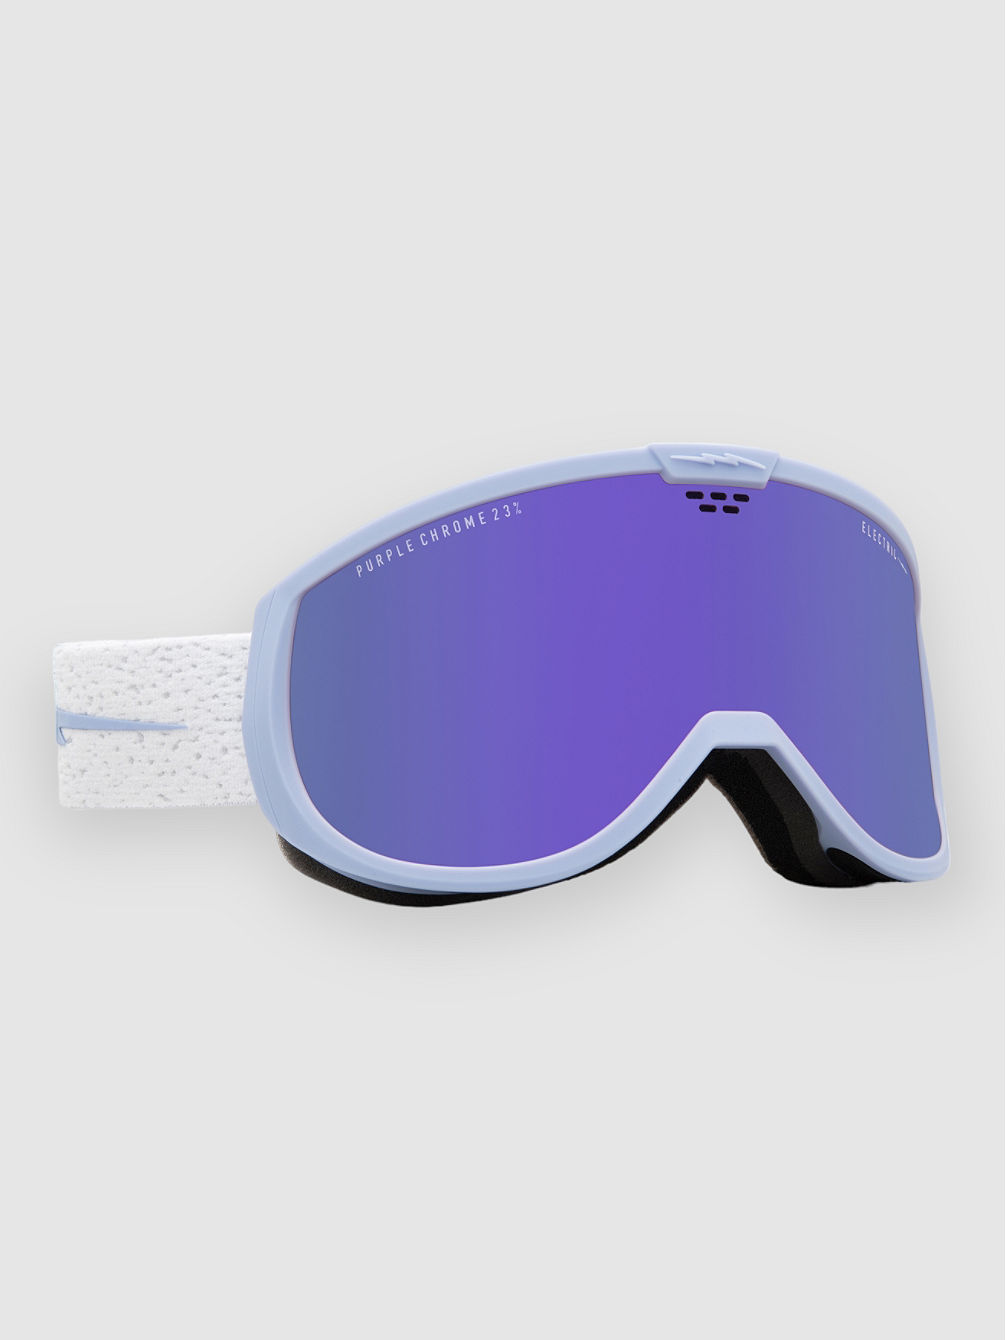 CAM ORCHID SPECKLE Goggle